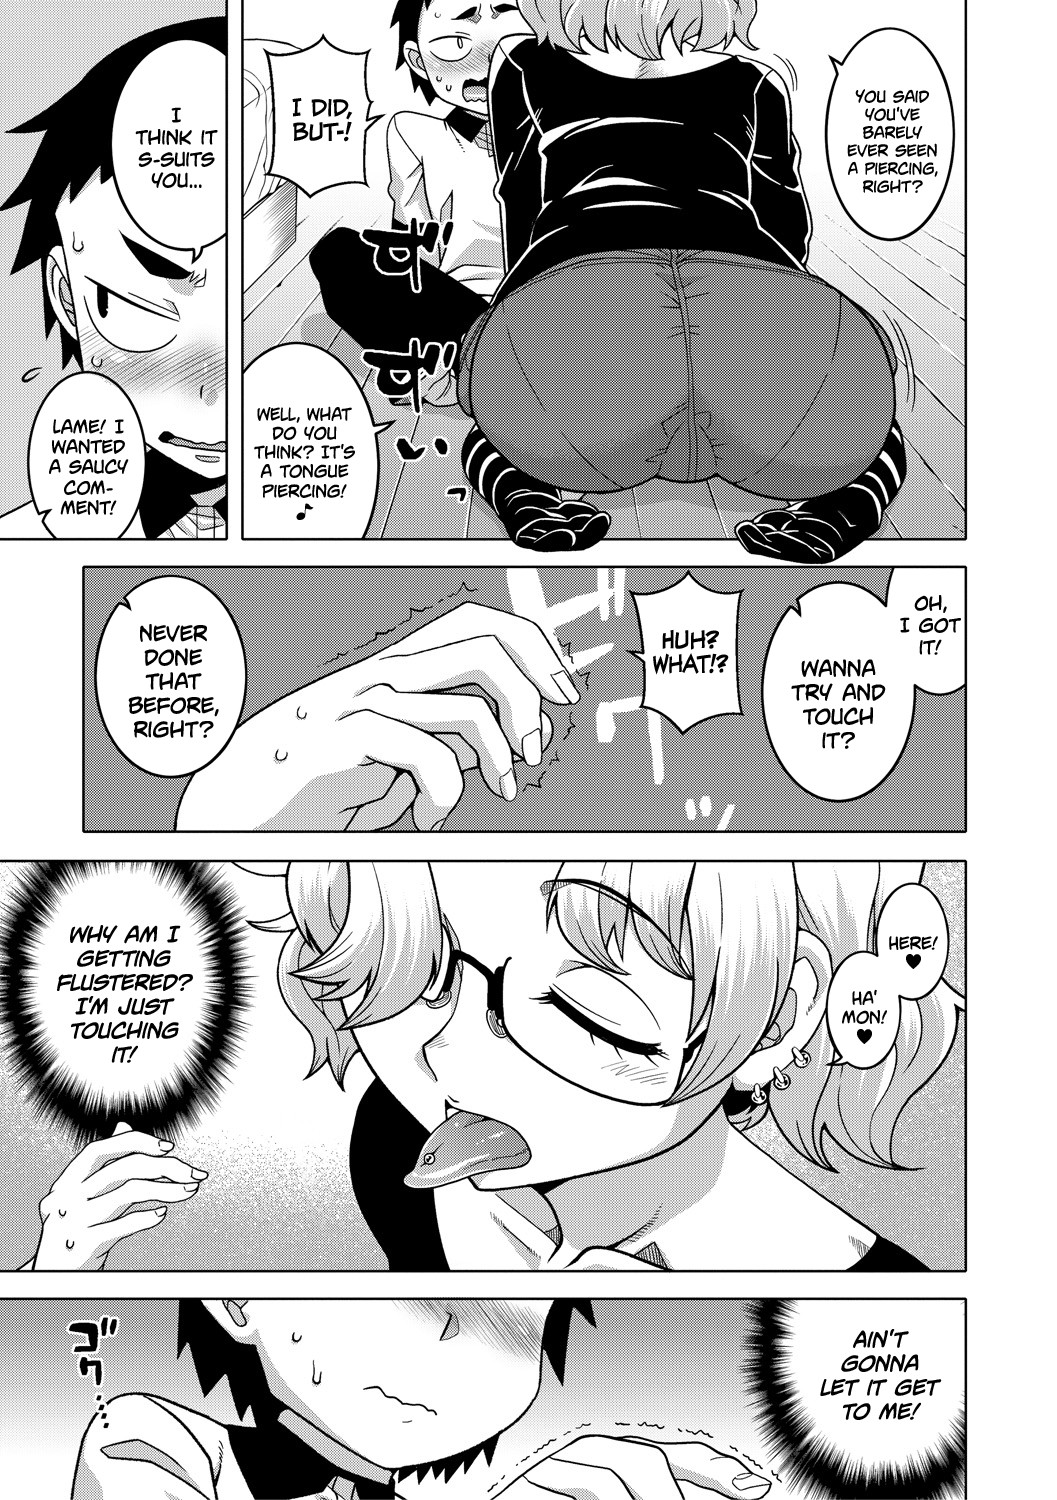 Hentai Manga Comic-My Stupid Older Sister Who's Just a Bit Hot Because Of Her Large Breasts-Chapter 4-7